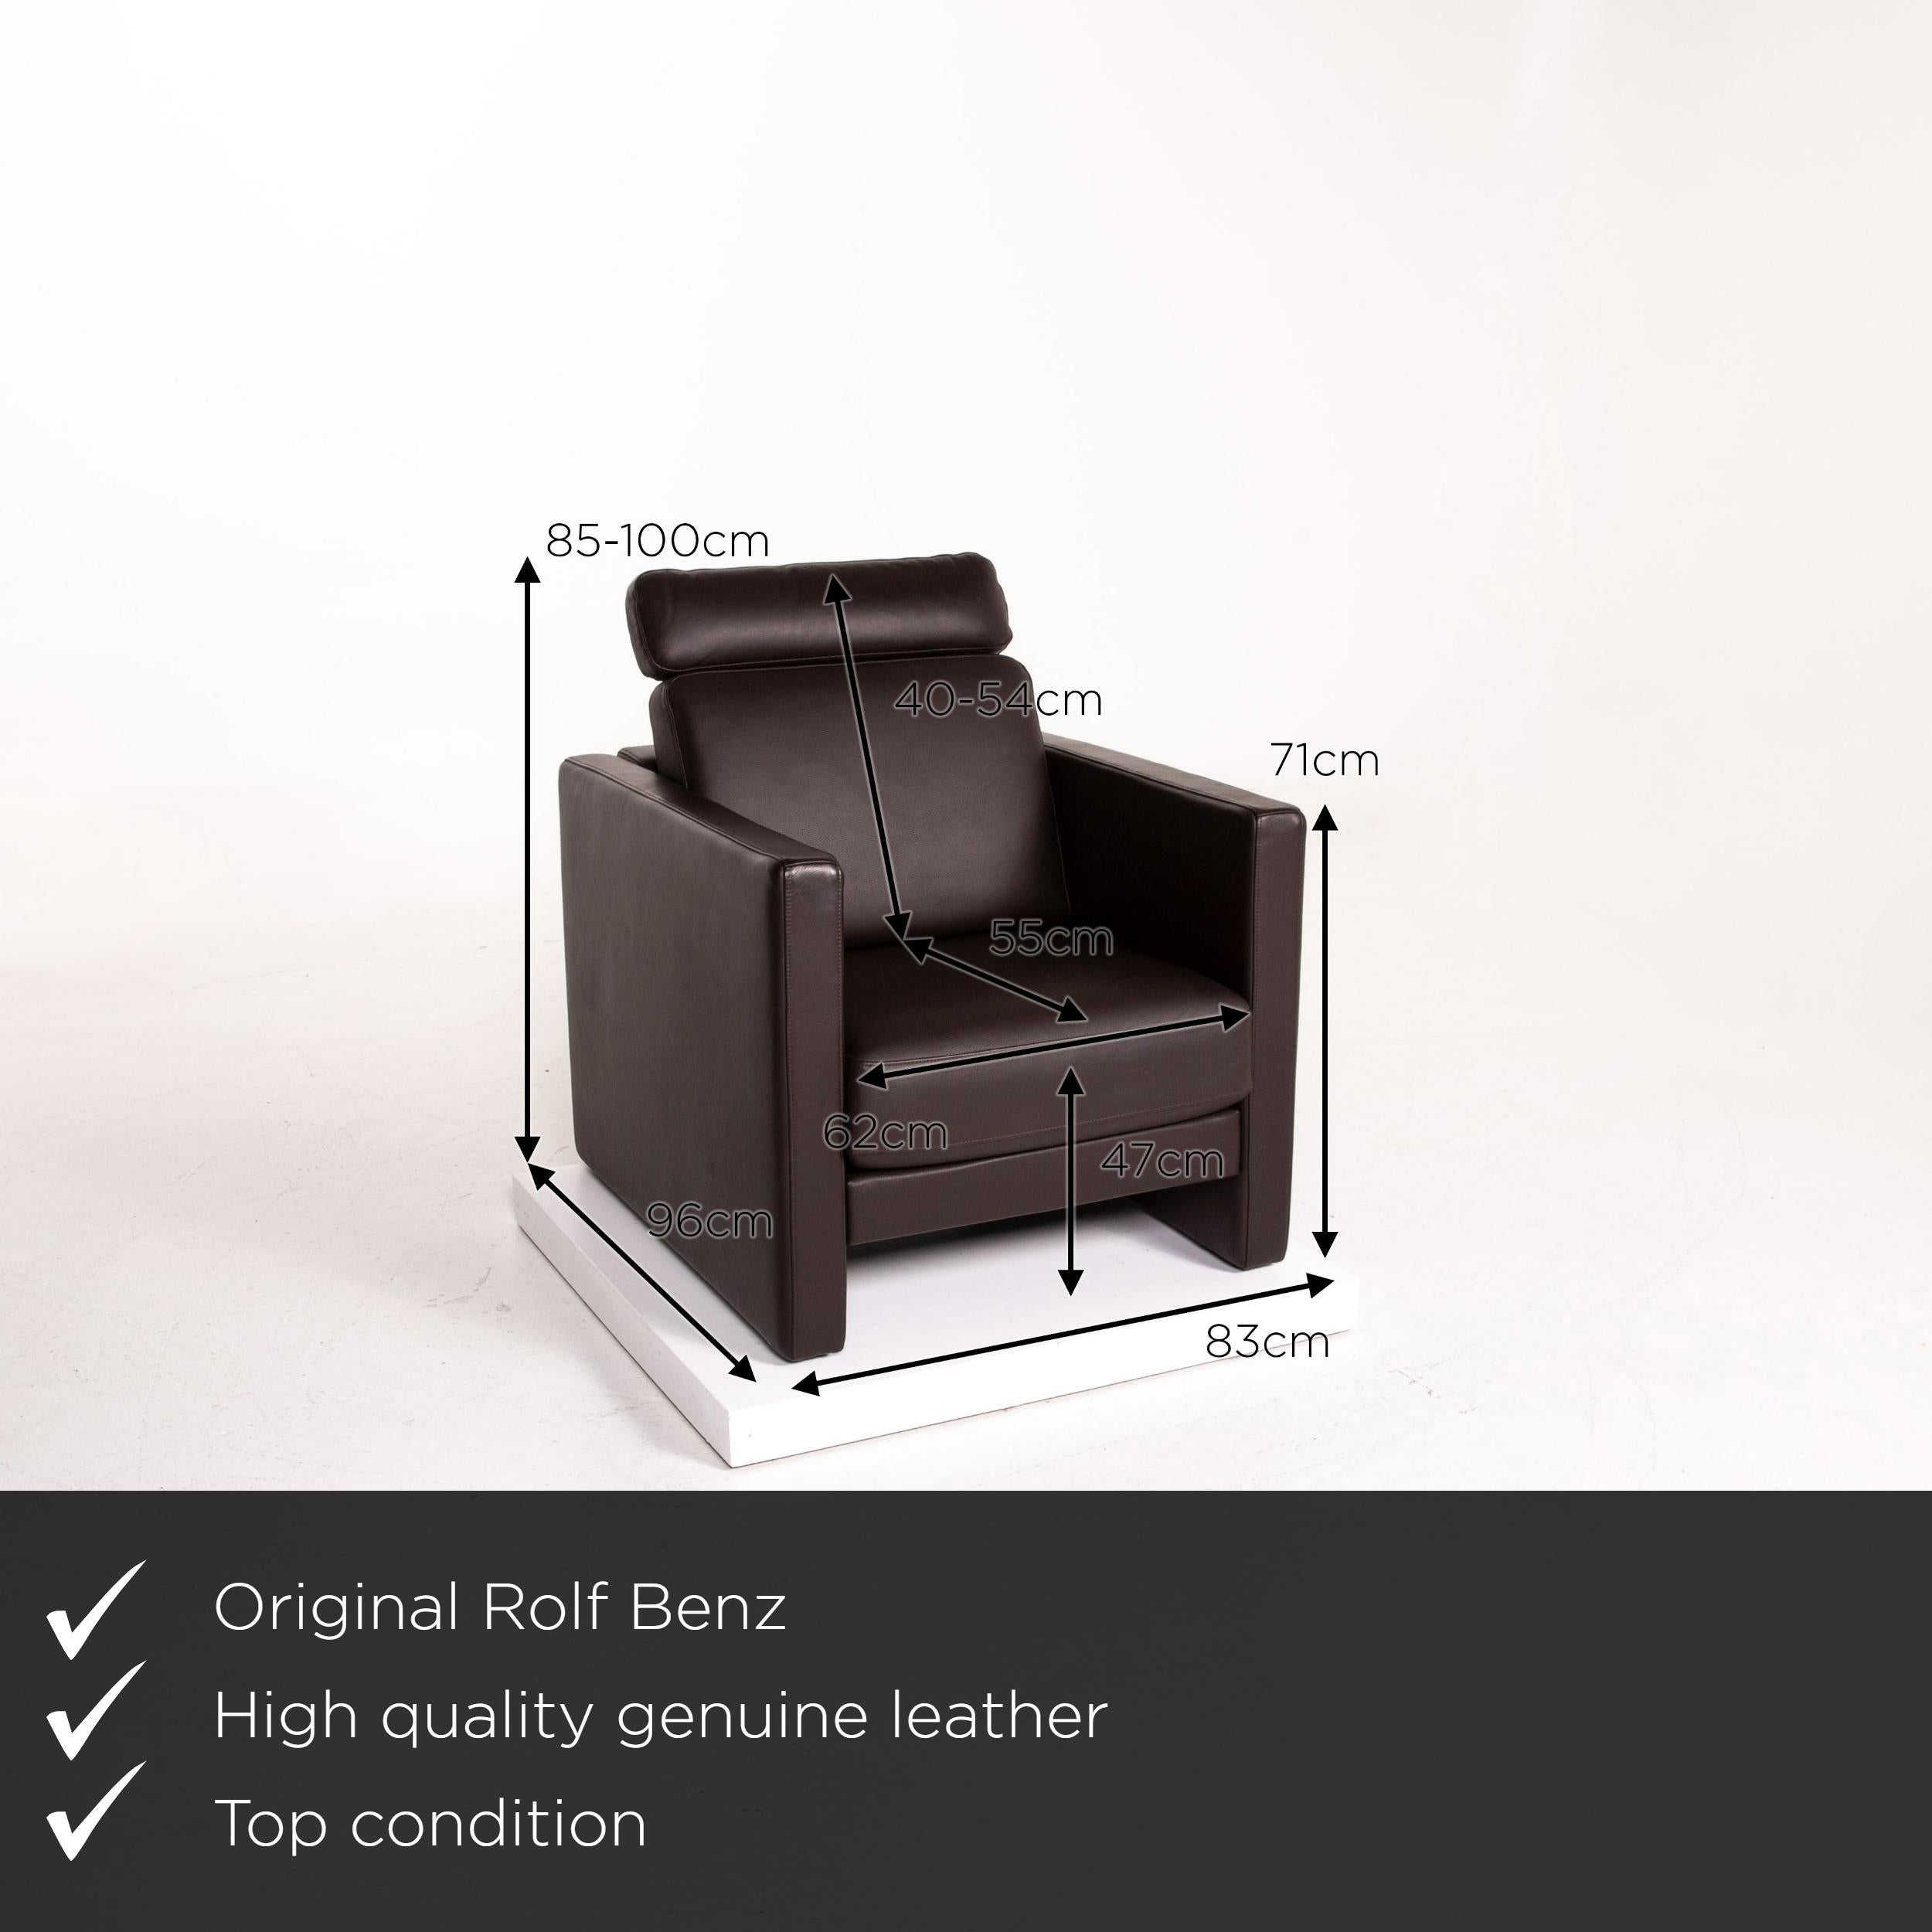 We present to you a Rolf Benz Ego leather armchair dark brown brown.
 
 

 Product measurements in centimeters:
 

Depth 96
Width 83
Height 85
Seat height 47
Rest height 71
Seat depth 55
Seat width 62
Back height 40.